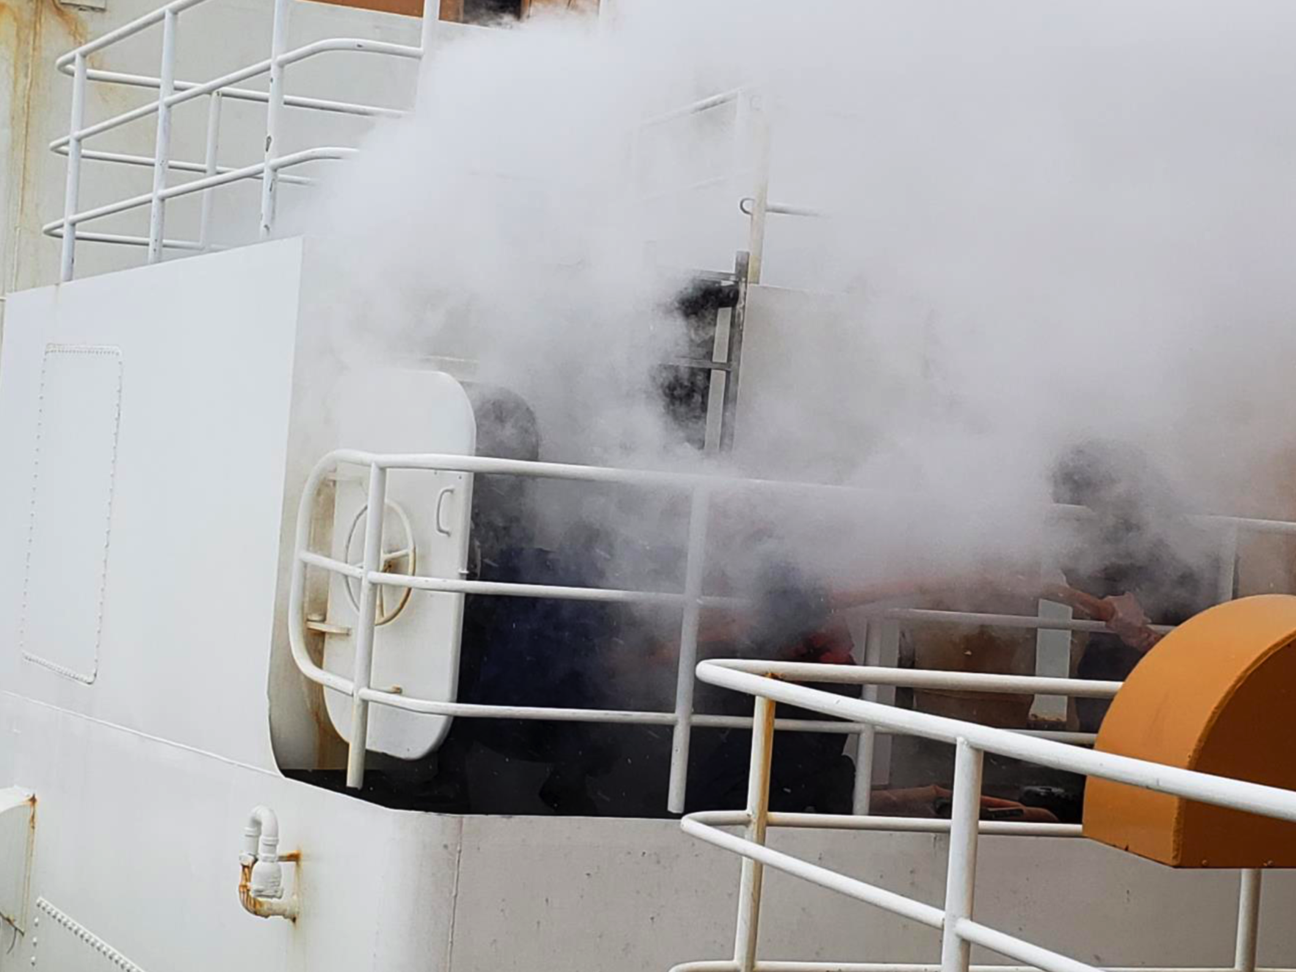 U.S. Coast Guard Cutter Polar Star fire team responds to an incinerator room fire onboard Feb. 10, 2019, in the Southern Ocean. Two attack teams from both repair lockers combated the fire with portable CO2 and PKP fire extinguishers and firefighting water for two hours before it was extinguished.